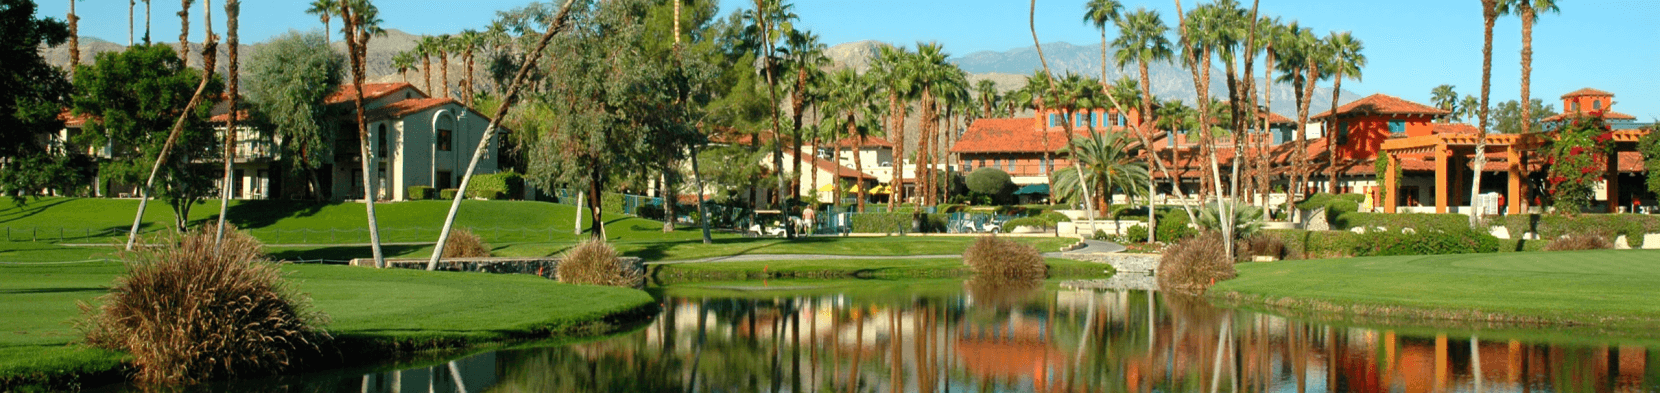 How much is a shuttle bus from lax to palm springs